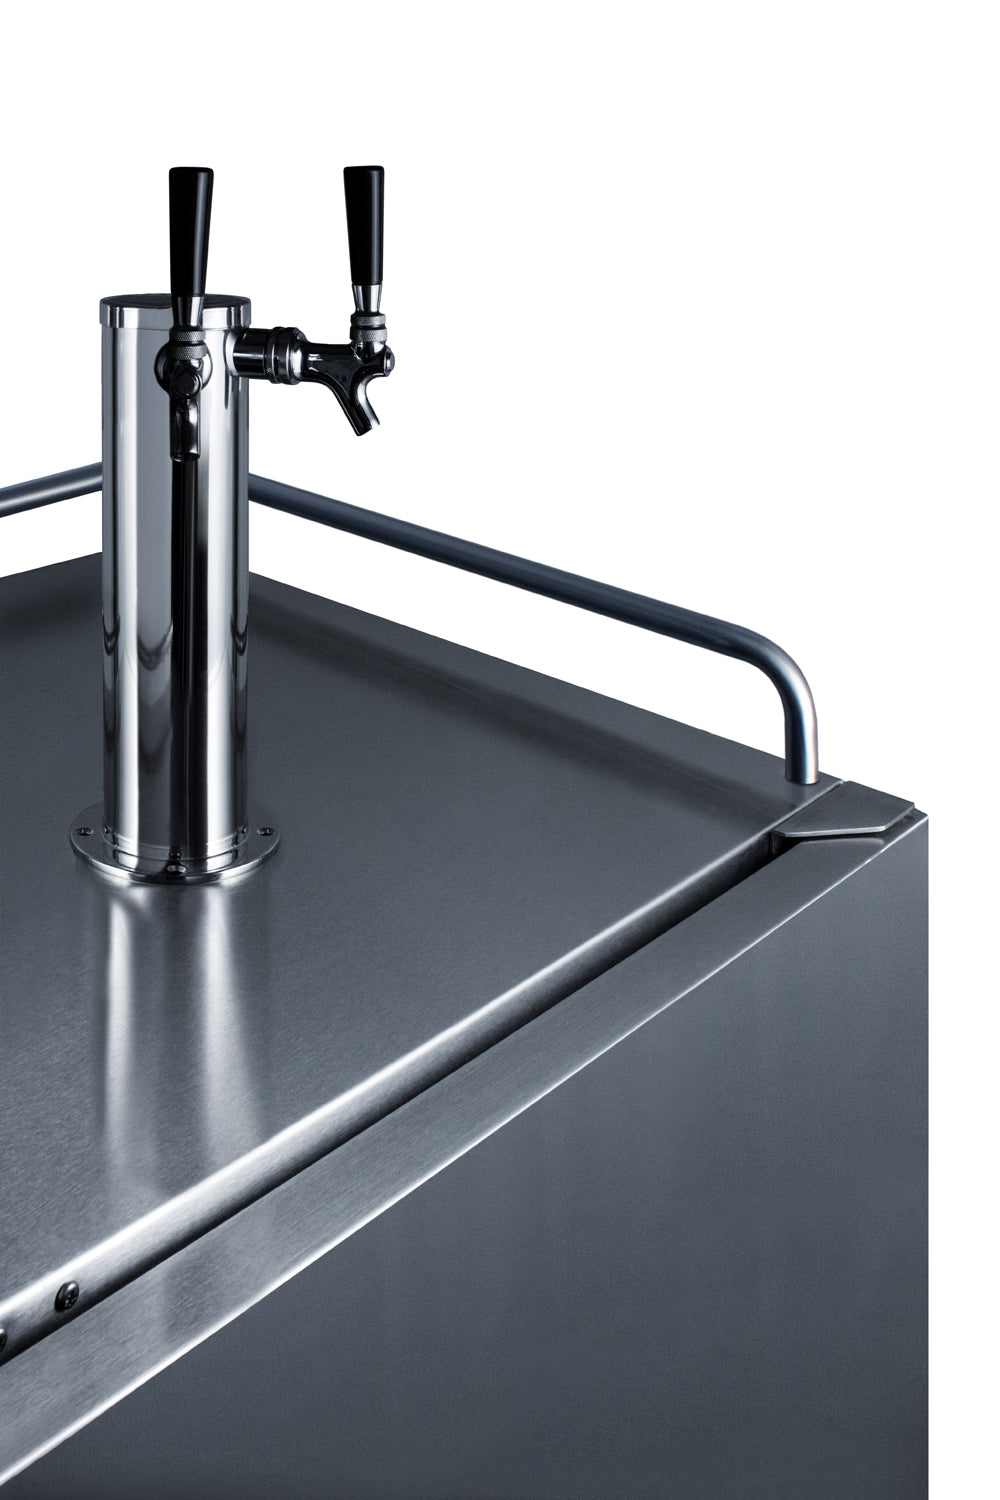 "Summit" 24" Wide Built-In Cold Brew Coffee Kegerator